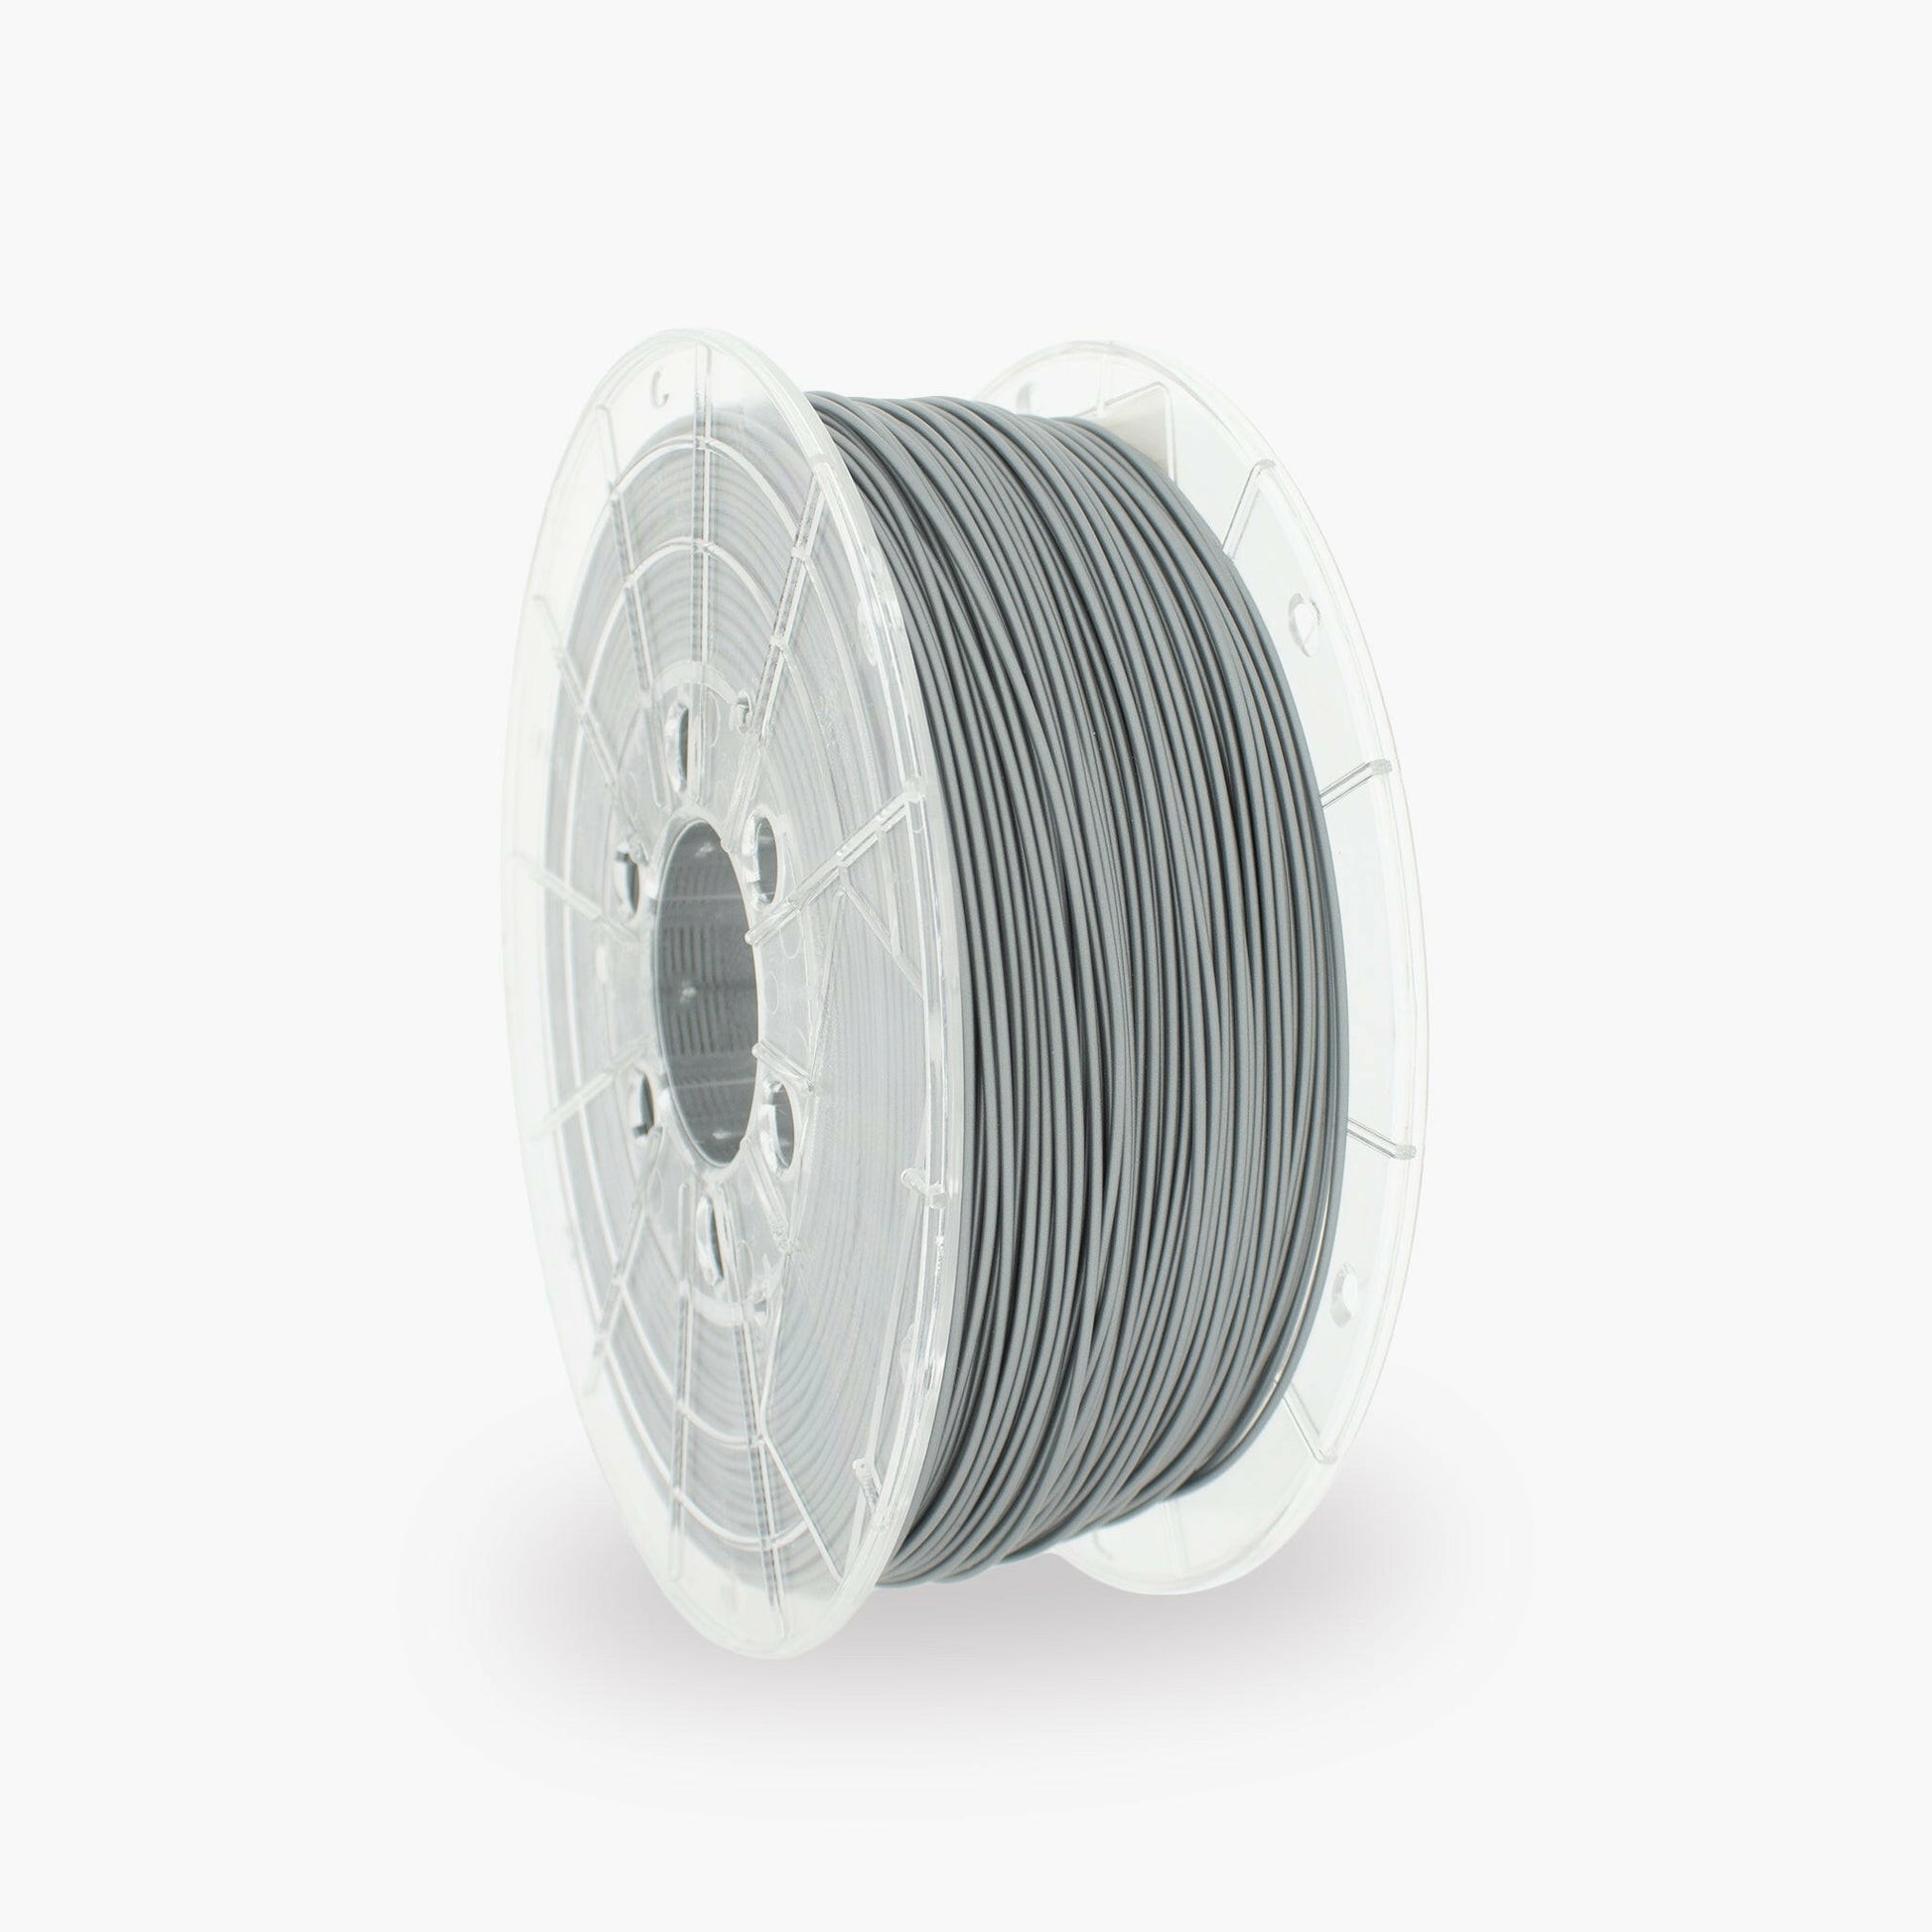 Silver PLA 3D Printer Filament with a diameter of 1.75mm on a 1KG Spool.